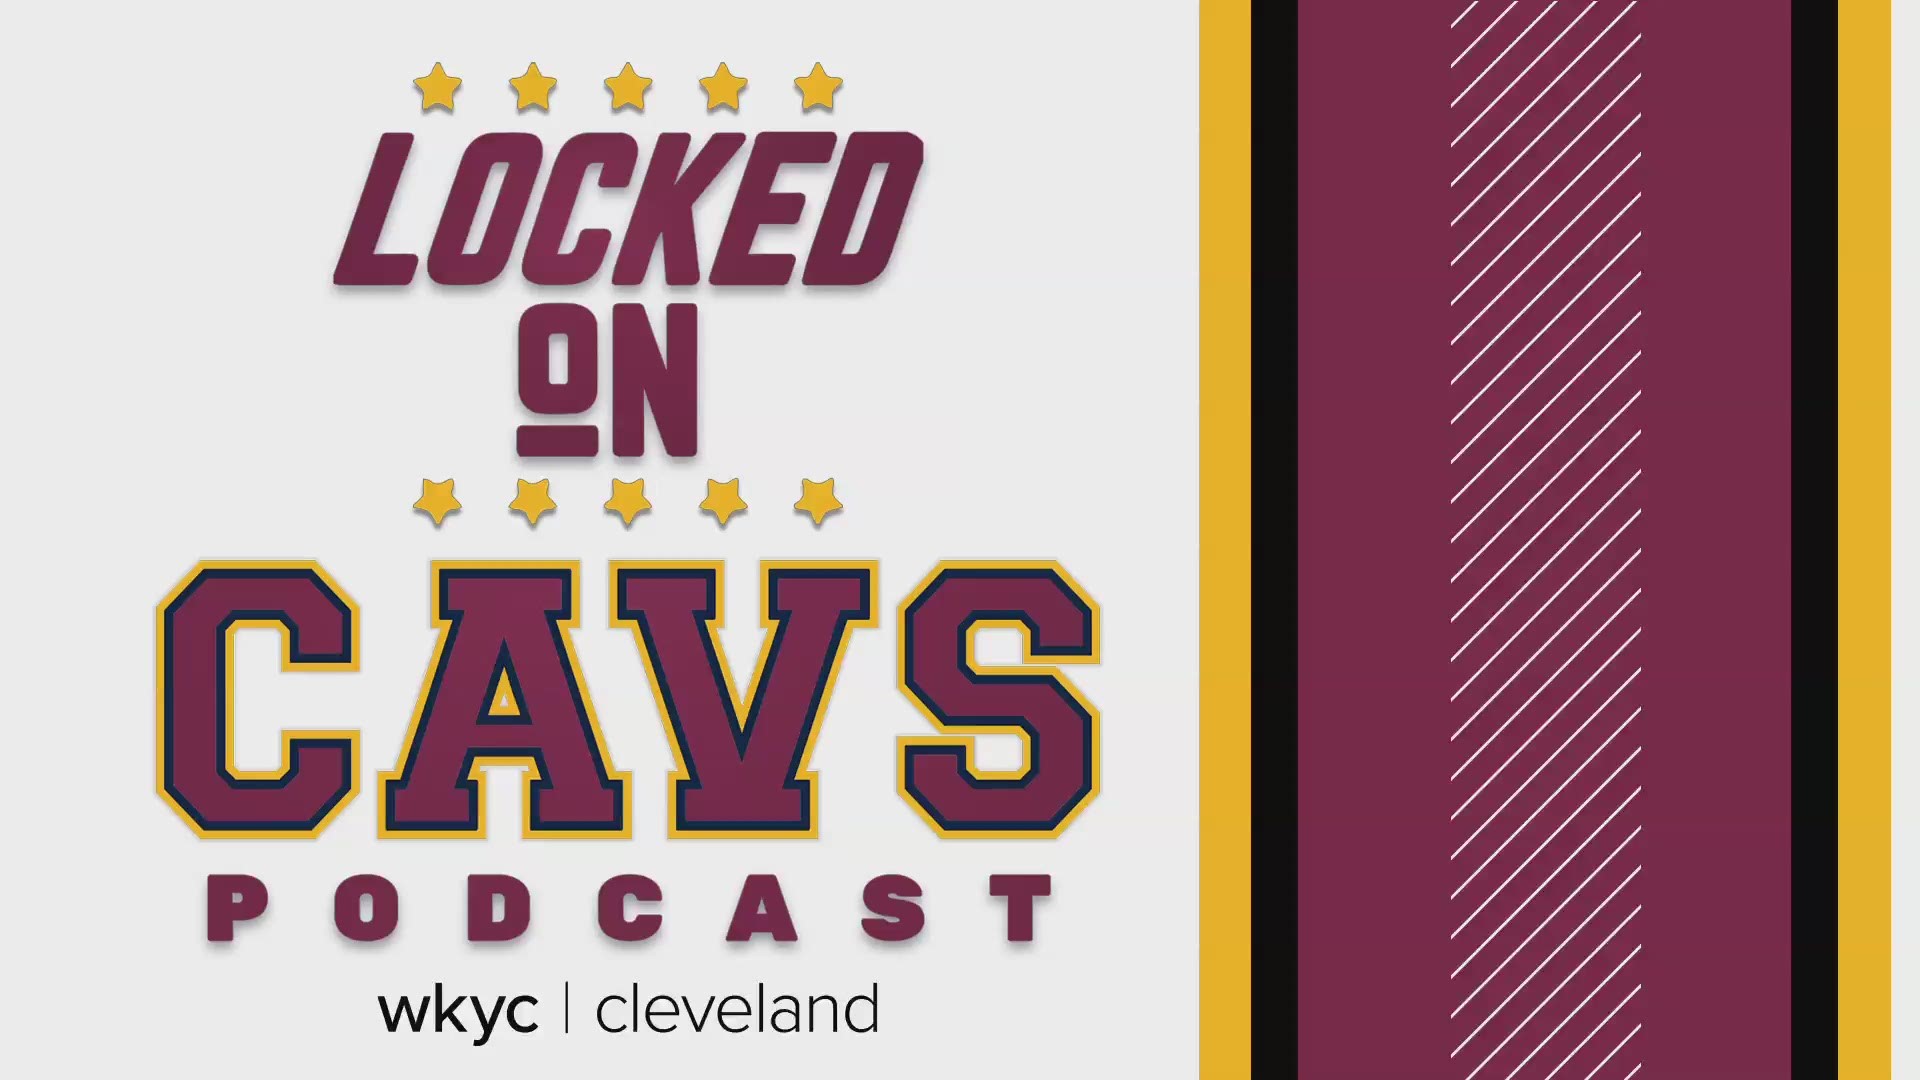 Chris Manning and Evan Dammarell discuss the latest on the Kevin Love situation and preview Wednesday's game vs. Orlando.